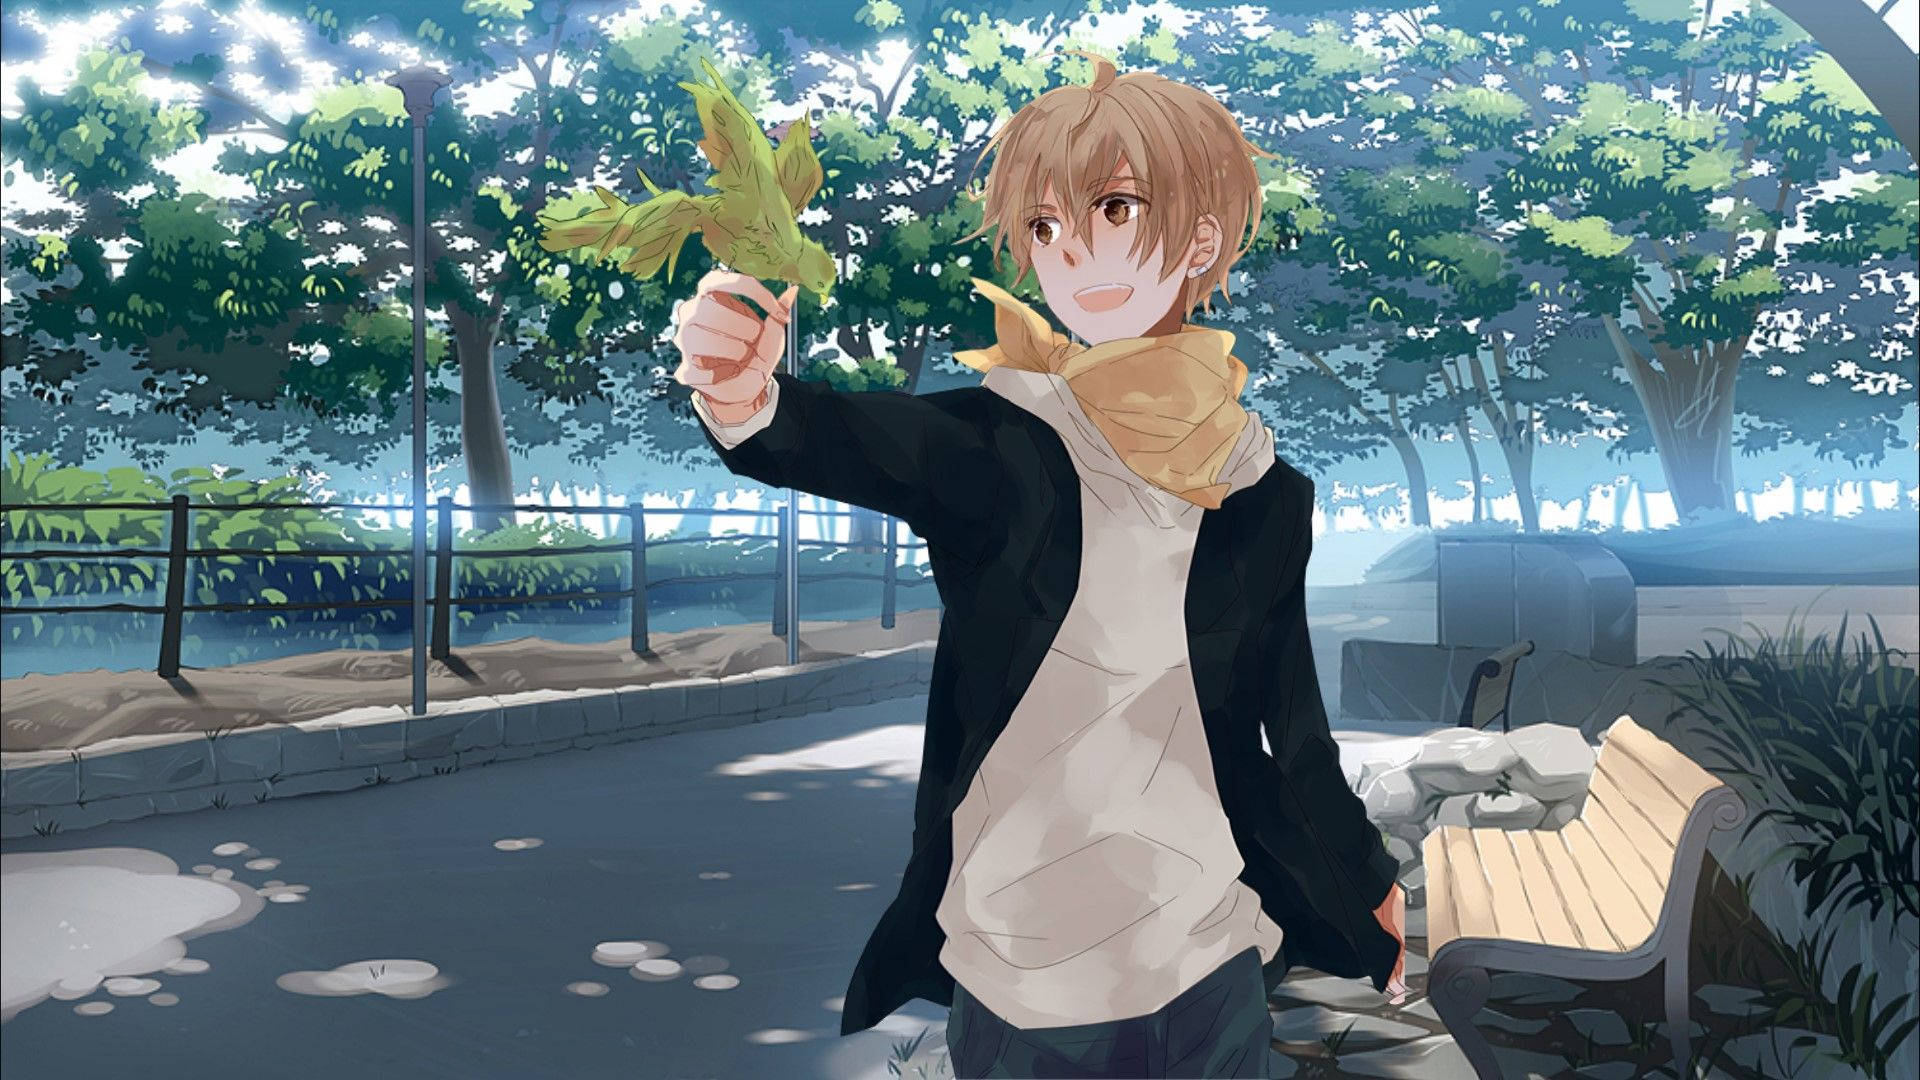 Cute Anime Boy In The Park Background